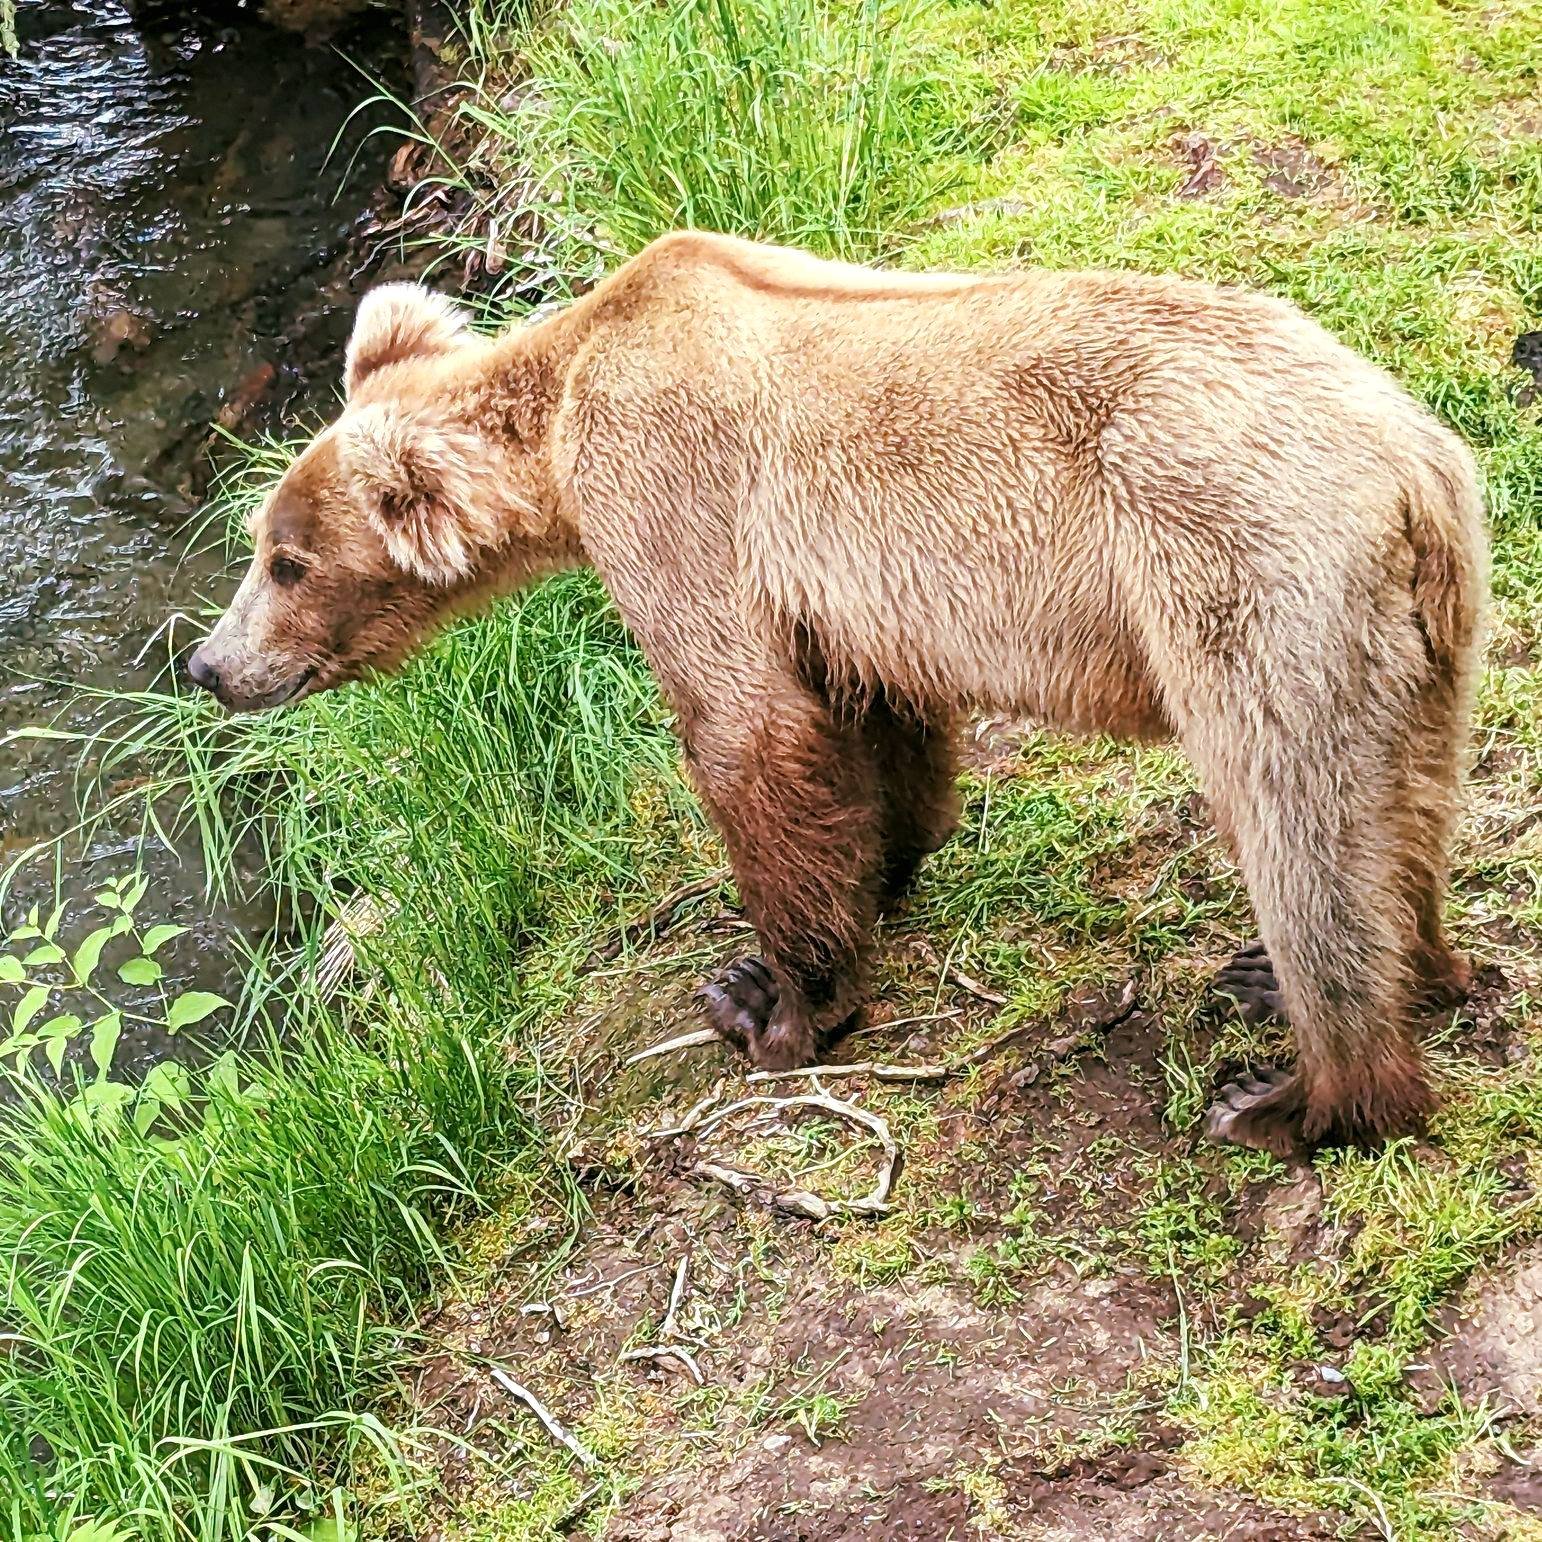 If you are visiting Alaska in July, be sure to grab your bear viewing seats now!  Only a few spots left for adventures to Brooks Falls!

Learn more about our tour at https://www.belugaair.com/brooks-falls-bear-watching

#brooksfalls #katmainationalpa